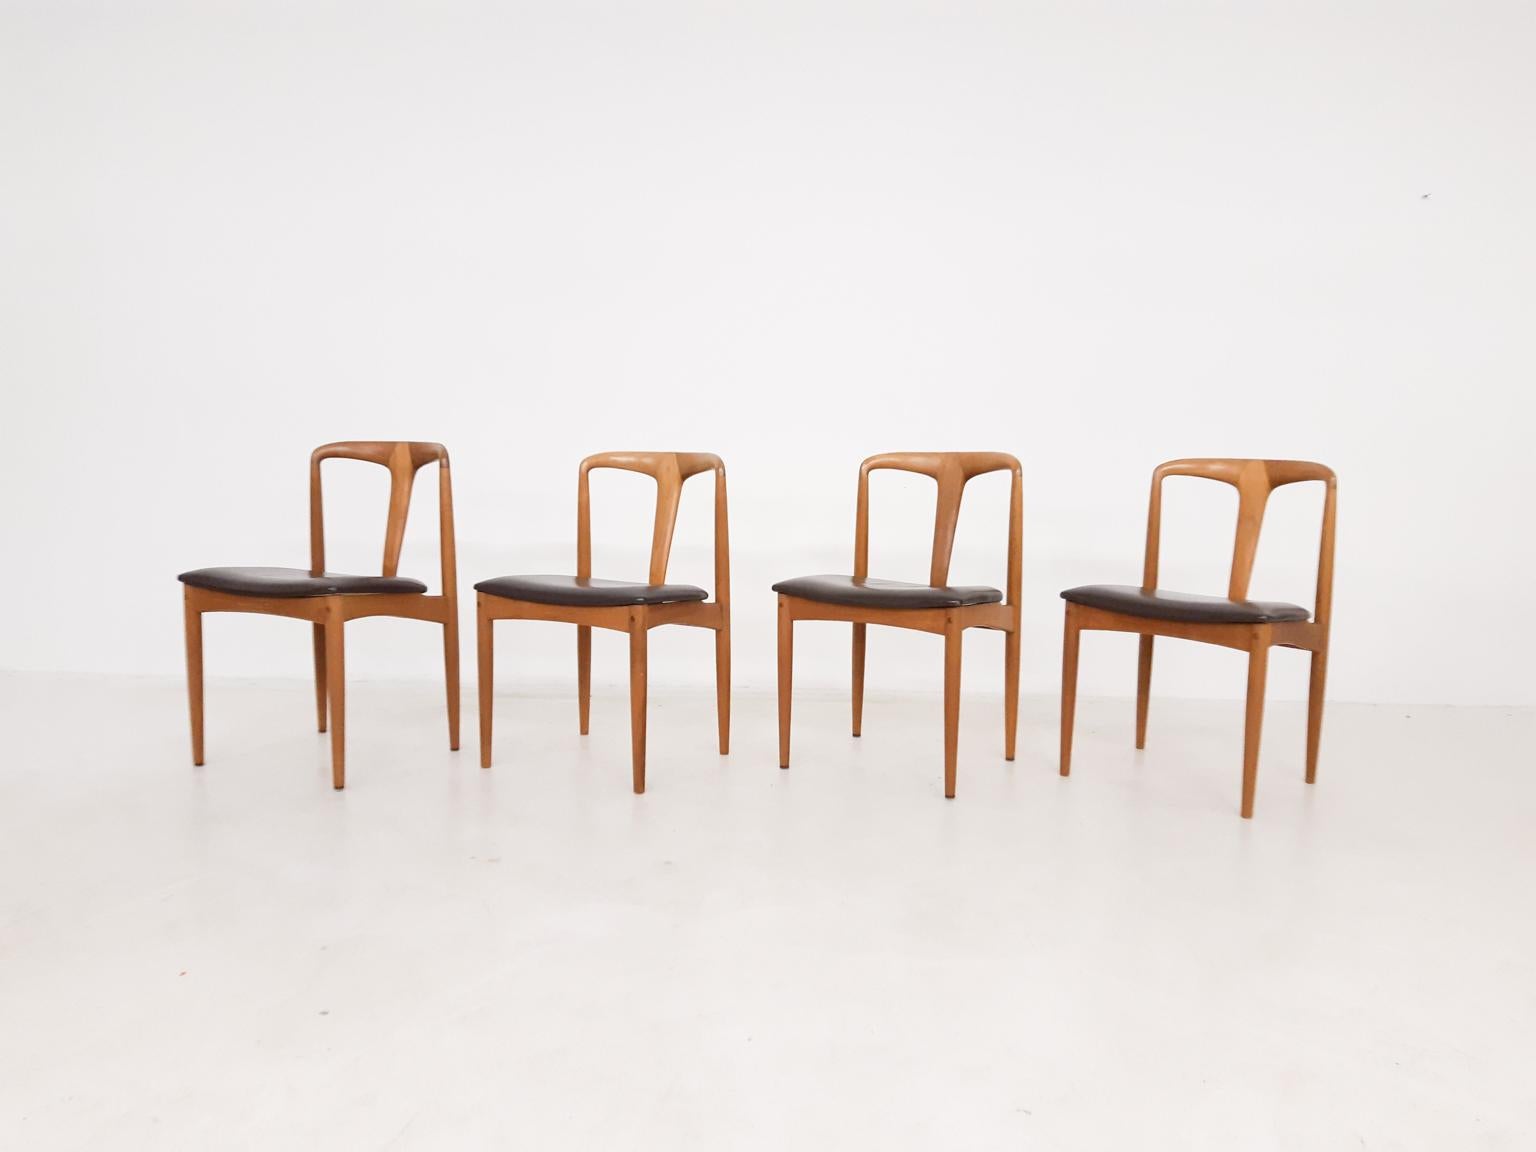 Set of four Danish design dining chairs made of oak and designed by Johannes Andersen. The chairs are produced by Uldum Möbelfabrik in Denmark in the 1950s. The chairs have original dark brown leather upholstery, which is in good condition.

Pure